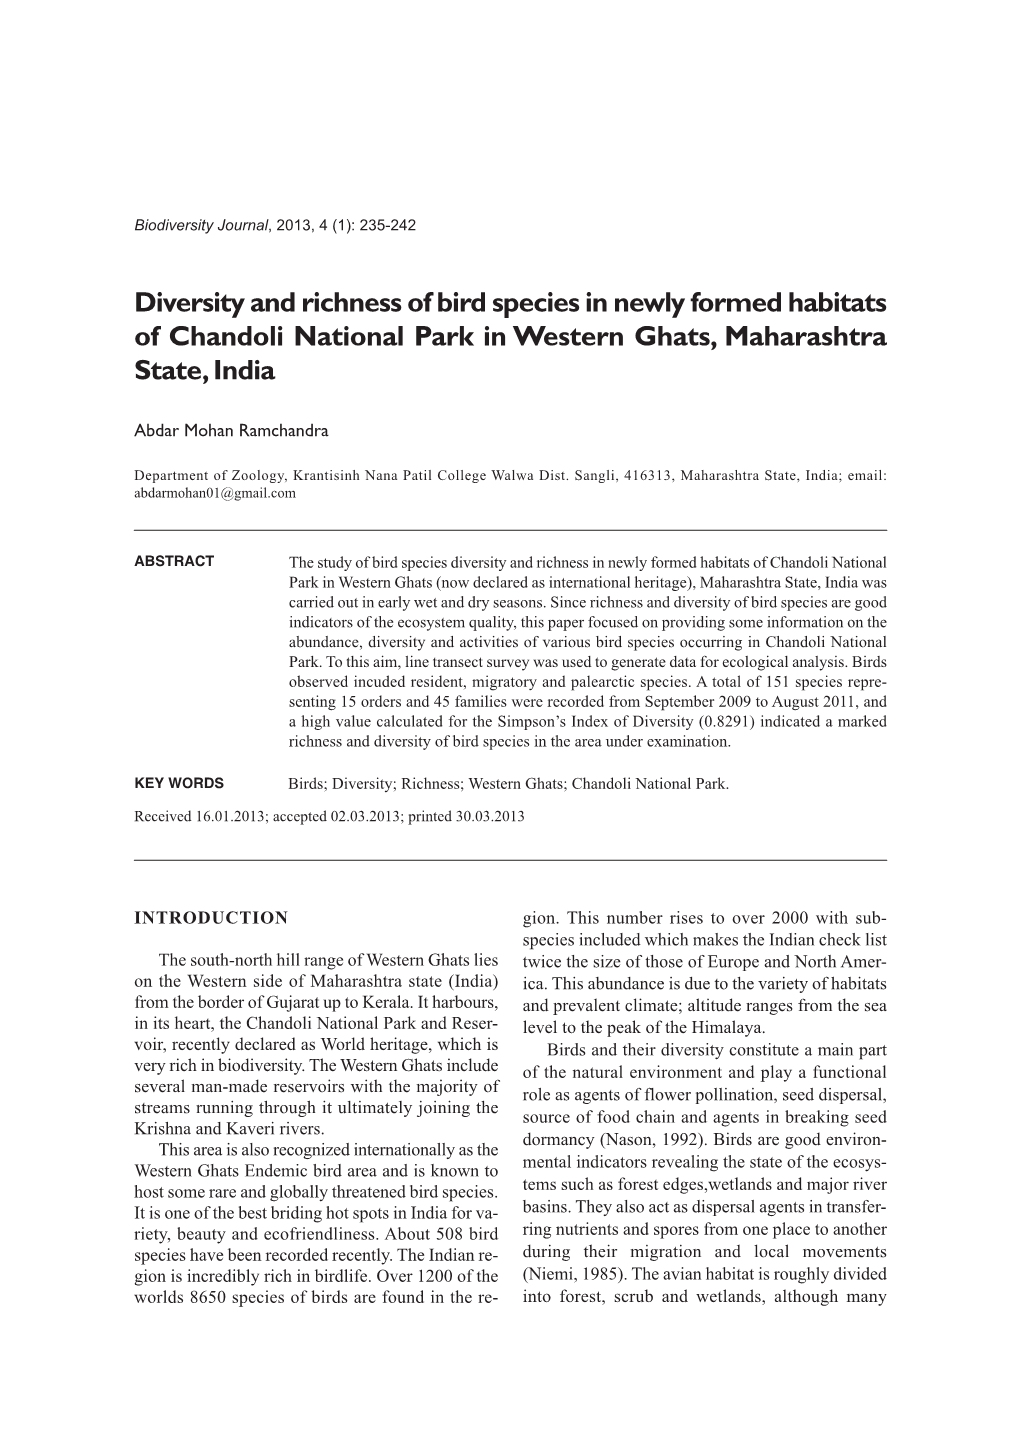 Diversity and Richness of Bird Species in Newly Formed Habitats of Chandoli National Park in Western Ghats, Maharashtra State, India